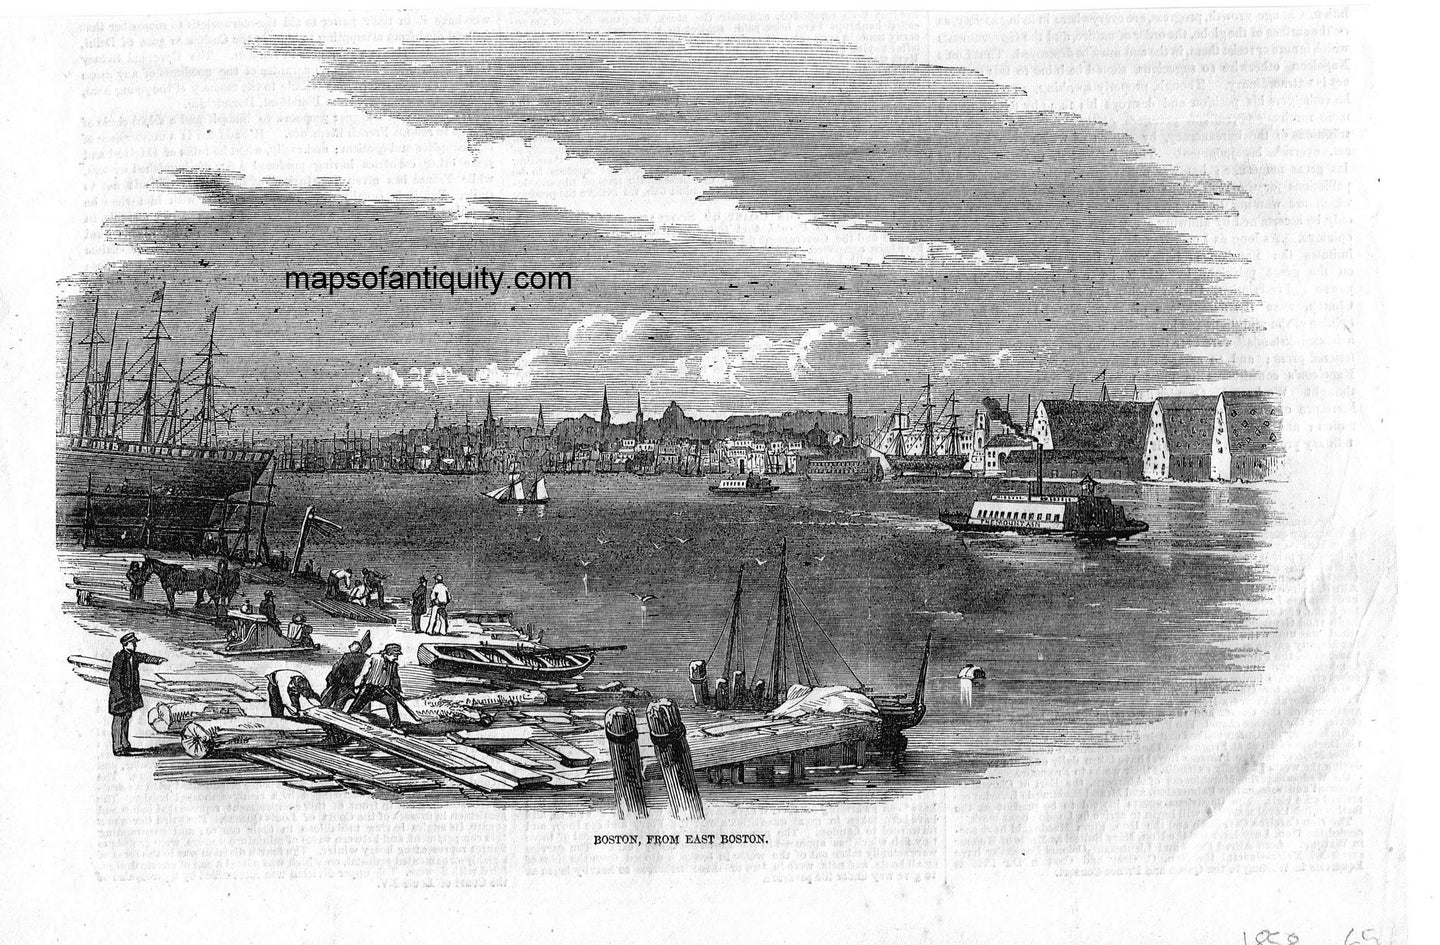 Antique-Black-&-White-Illustration-Boston-from-East-Boston-******-Towns-and-Cities-Boston-1858-Illustrated-London-News-Maps-Of-Antiquity